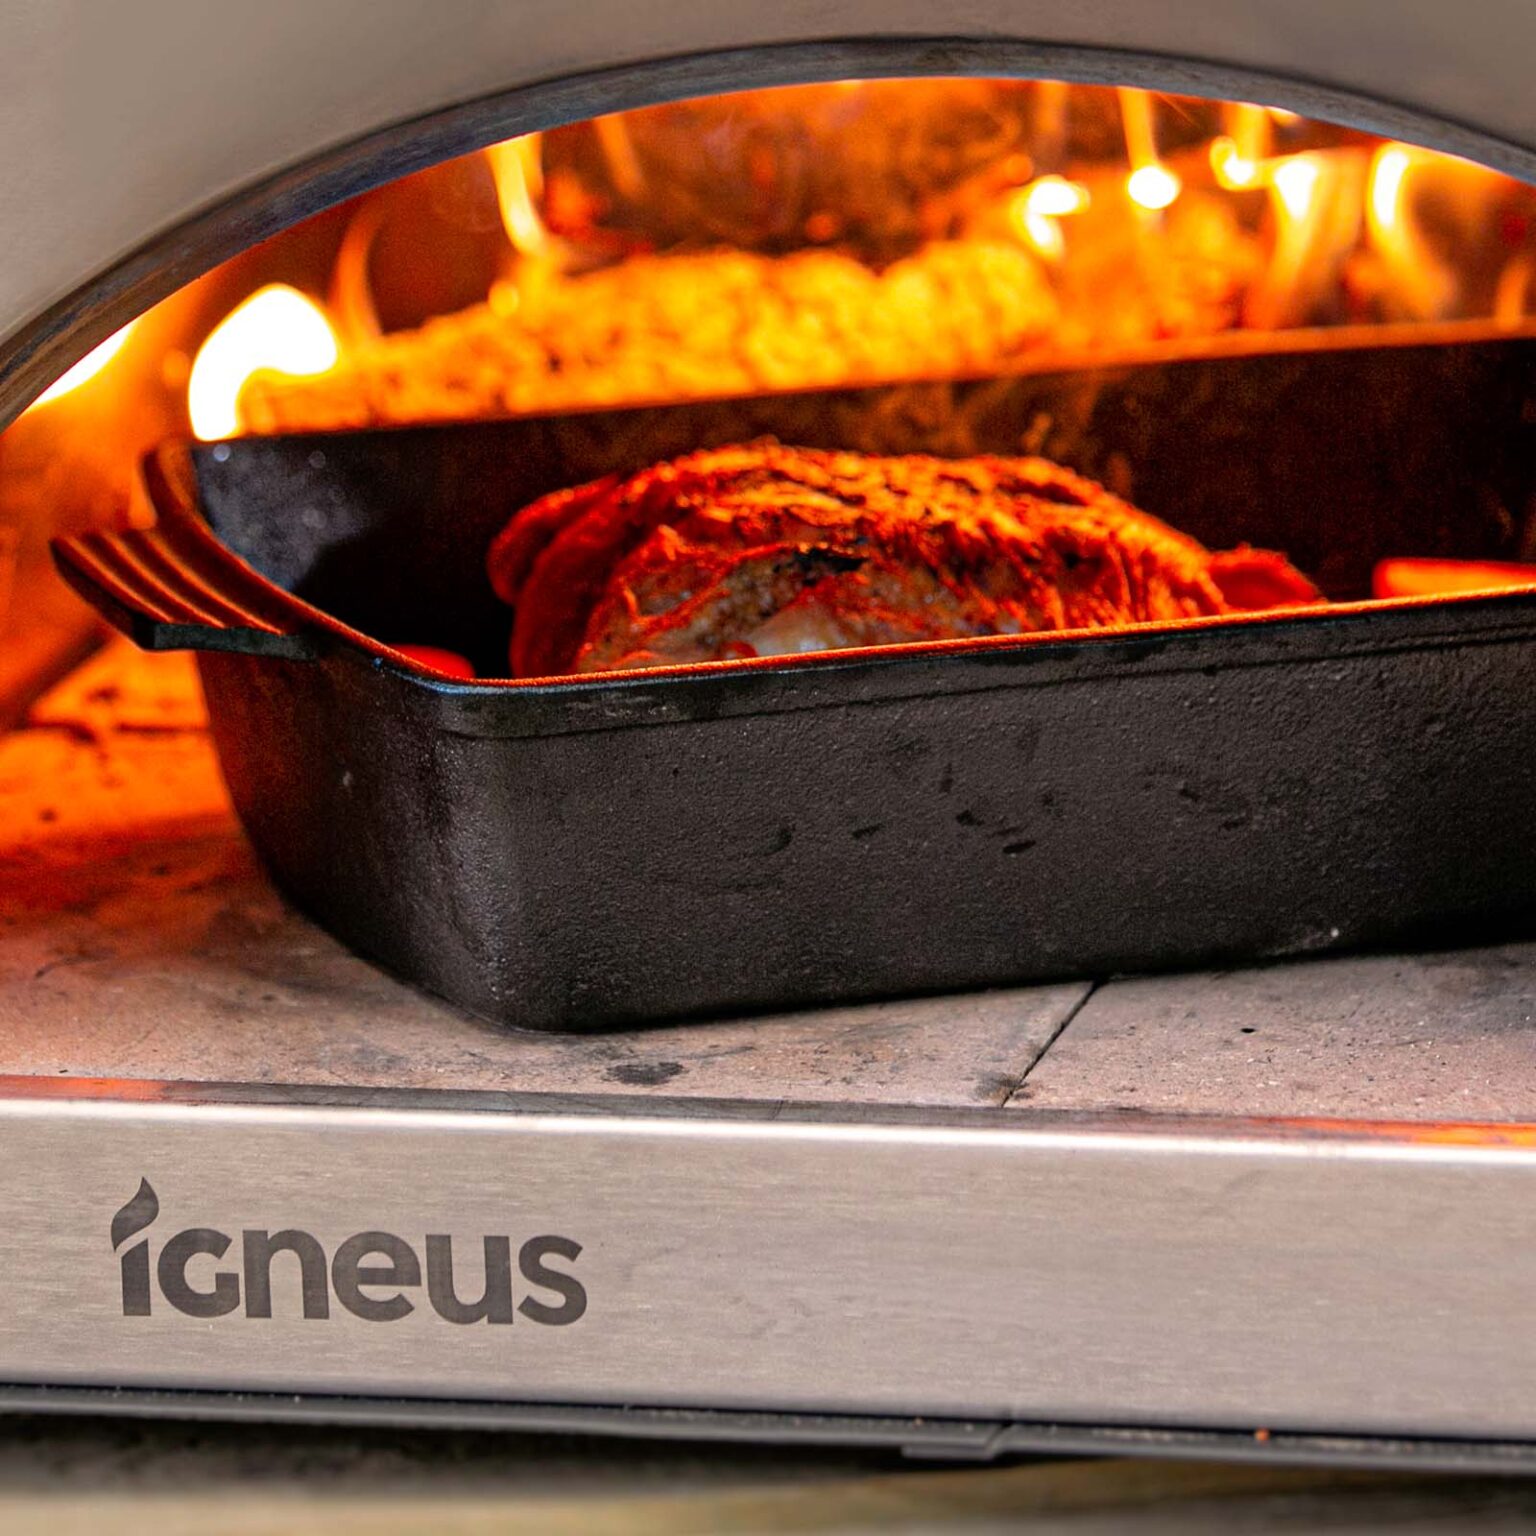 Igneus Cast Iron Roasting Pan - Igneus wood fired pizza ovens - pizza oven accessories